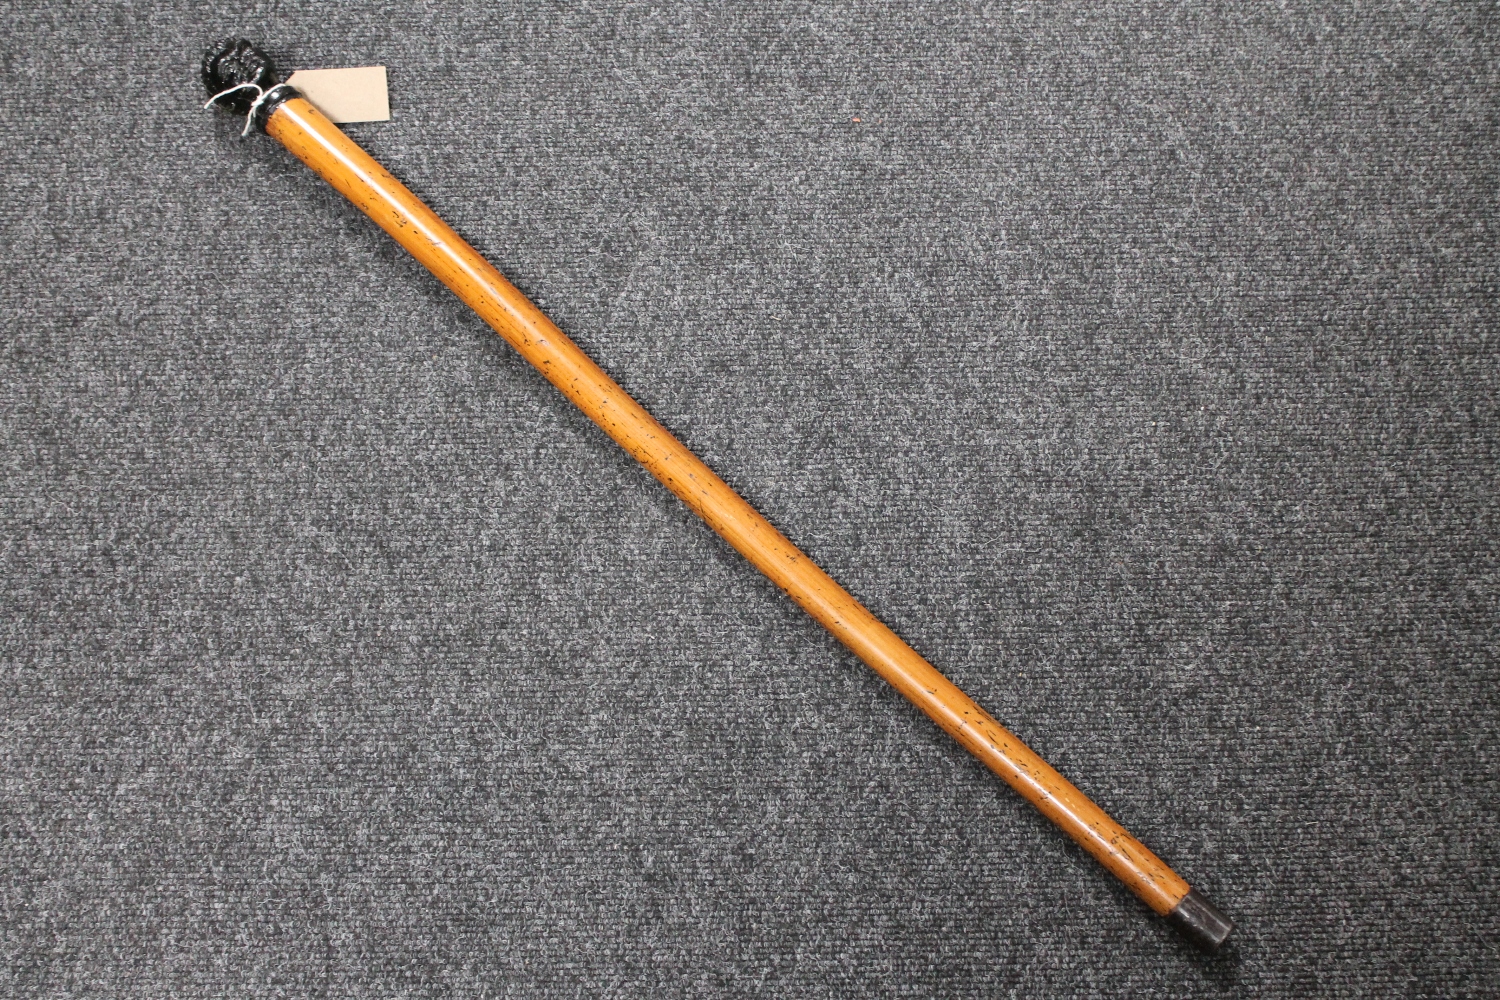 An unusual nineteenth century malacca walking cane with green glass knop terminal modelled as a - Image 2 of 2